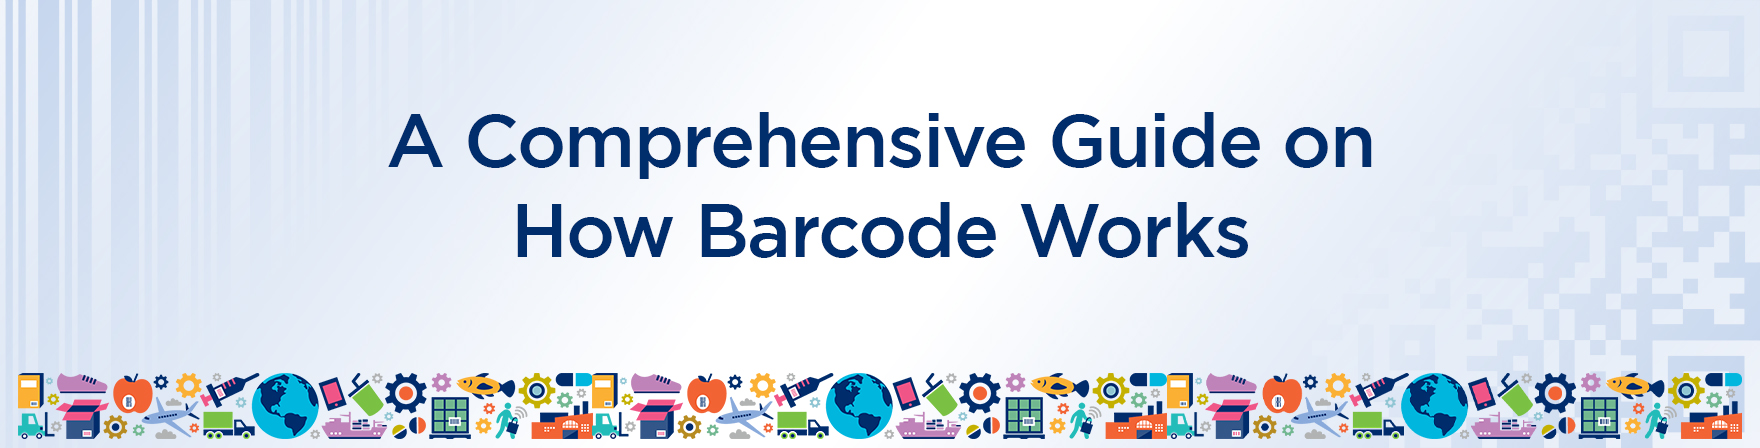 A Comprehensive Guide on How Barcodes Work